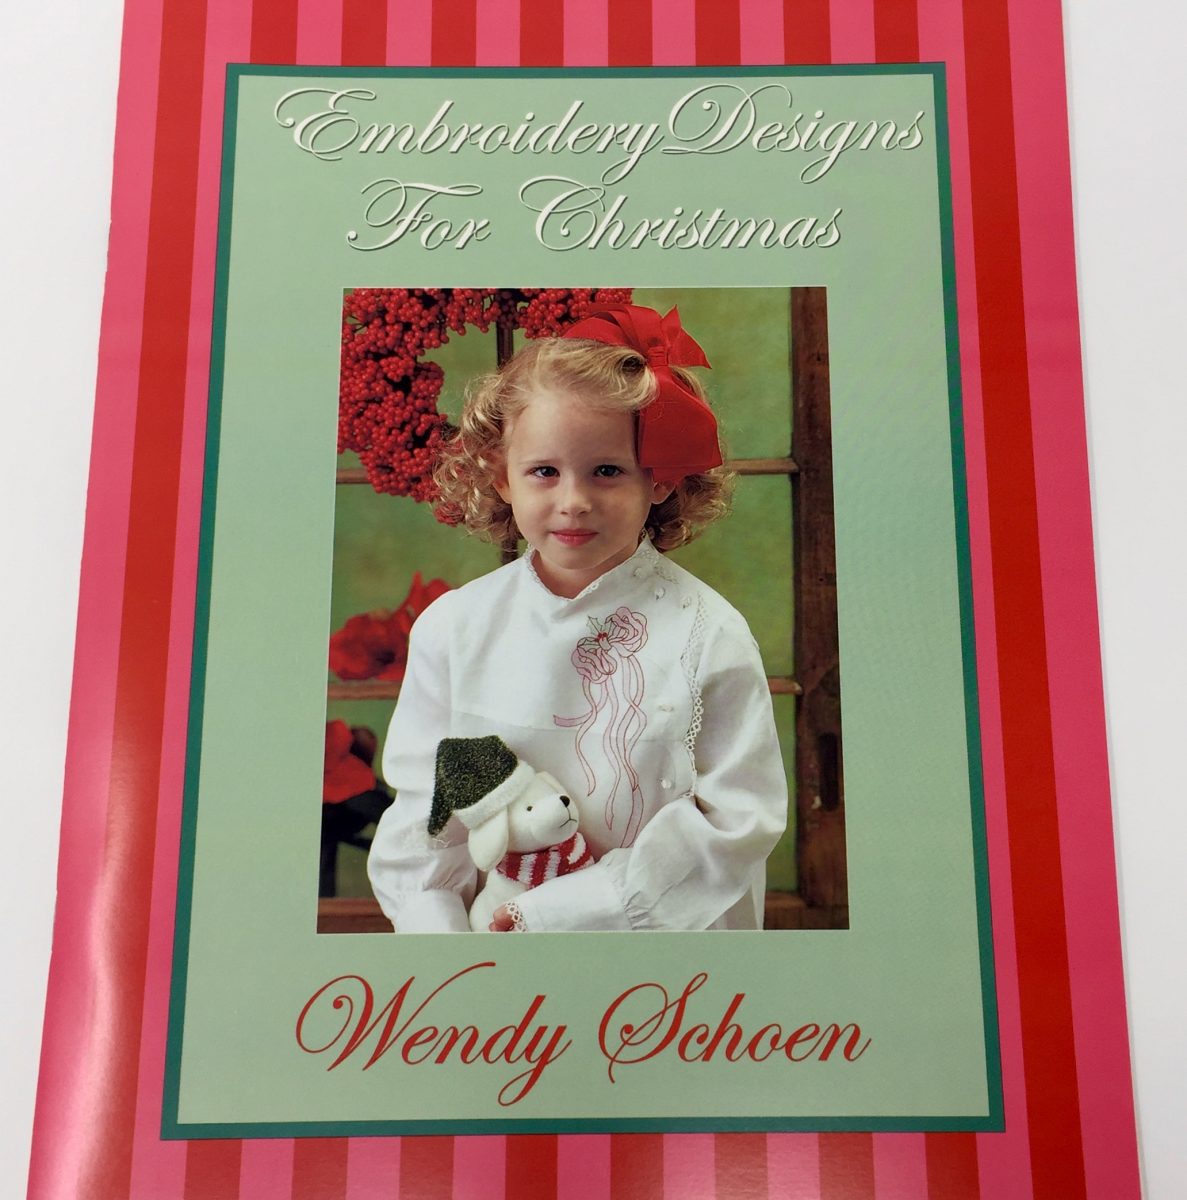 Embroidery Designs for Christmas - Wendy Schoen